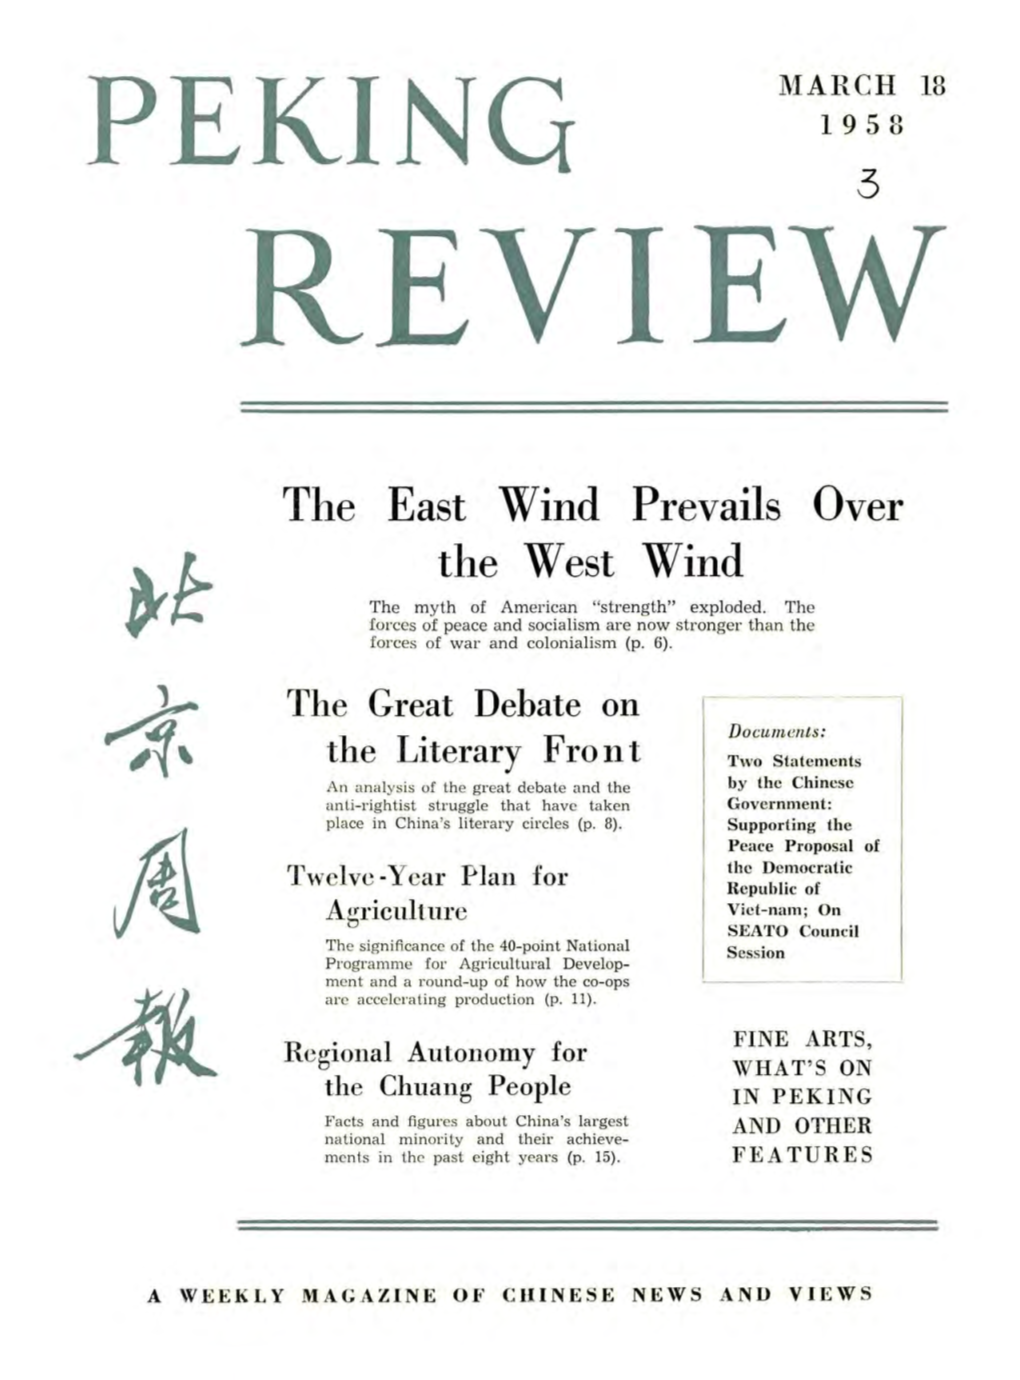 The East Wind Prevails Over the West Wind the Myth of American "Strength" Exploded